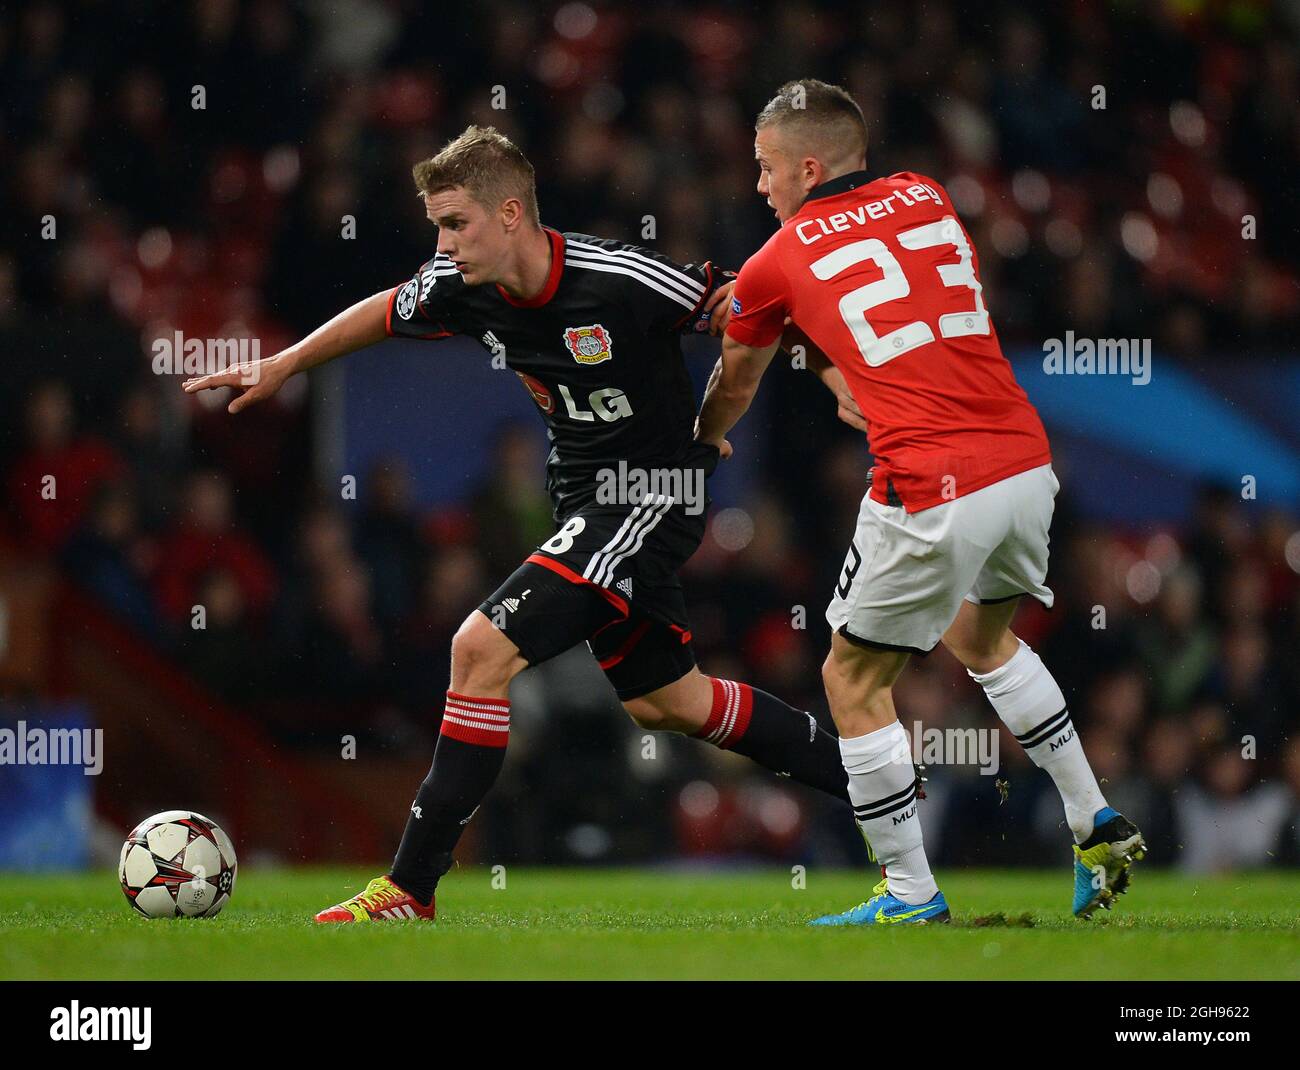 Lars Bender of Bayer Leverkusen tussles with Tom Cleverley of Manchester United during the UEFA Champions League Group A match between Manchester United and Bayer Leverkusen at Old Trafford in Manchester, United Kingdom on Sept. 17, 2013. Stock Photo